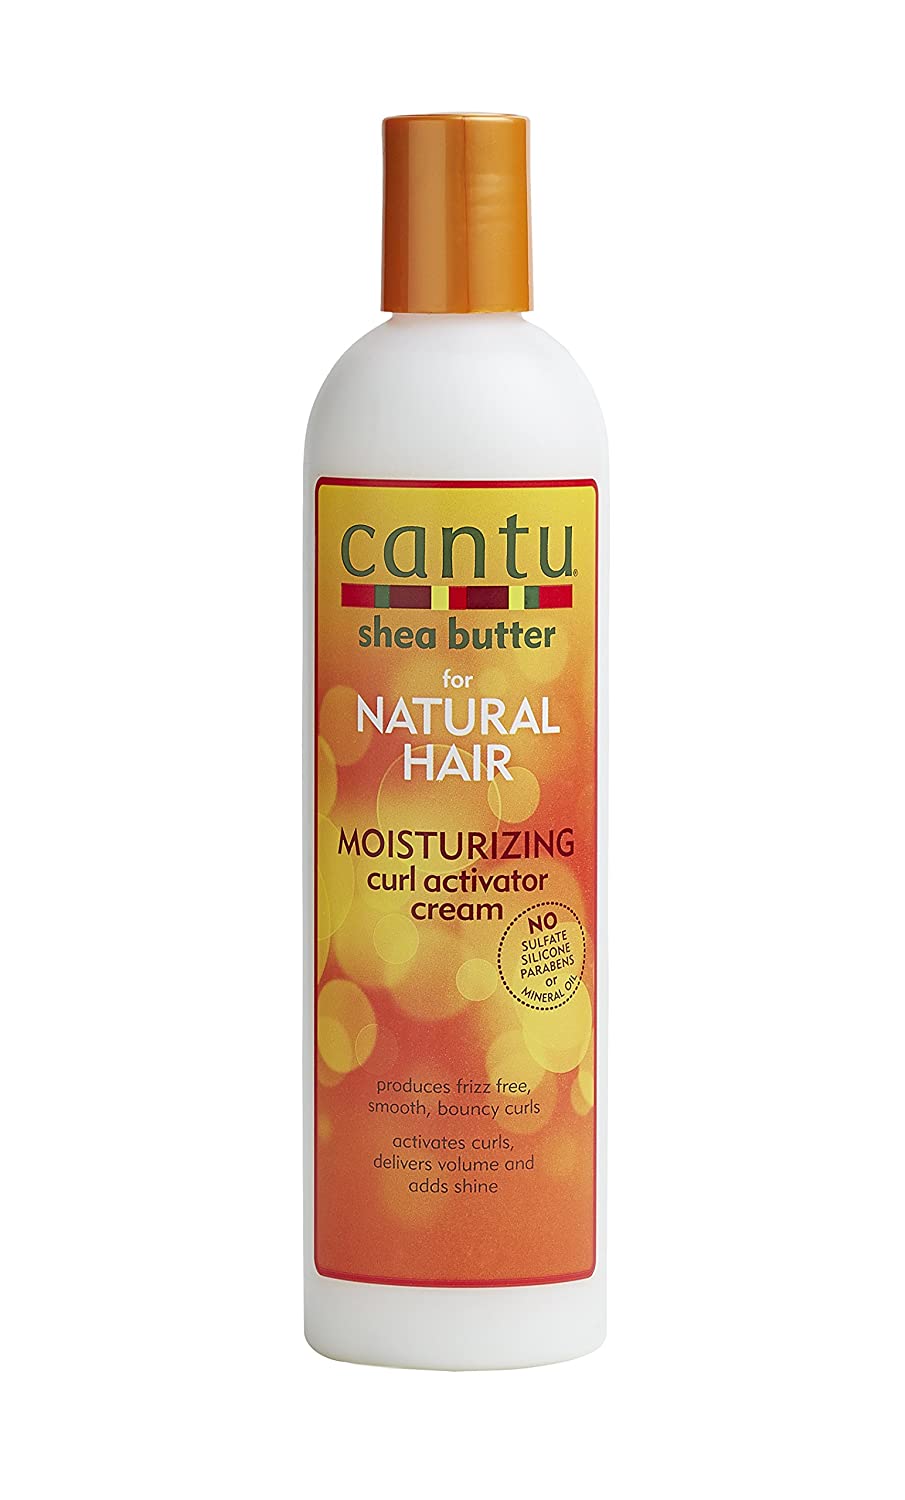 Best Curl Activator For Relaxed Hair